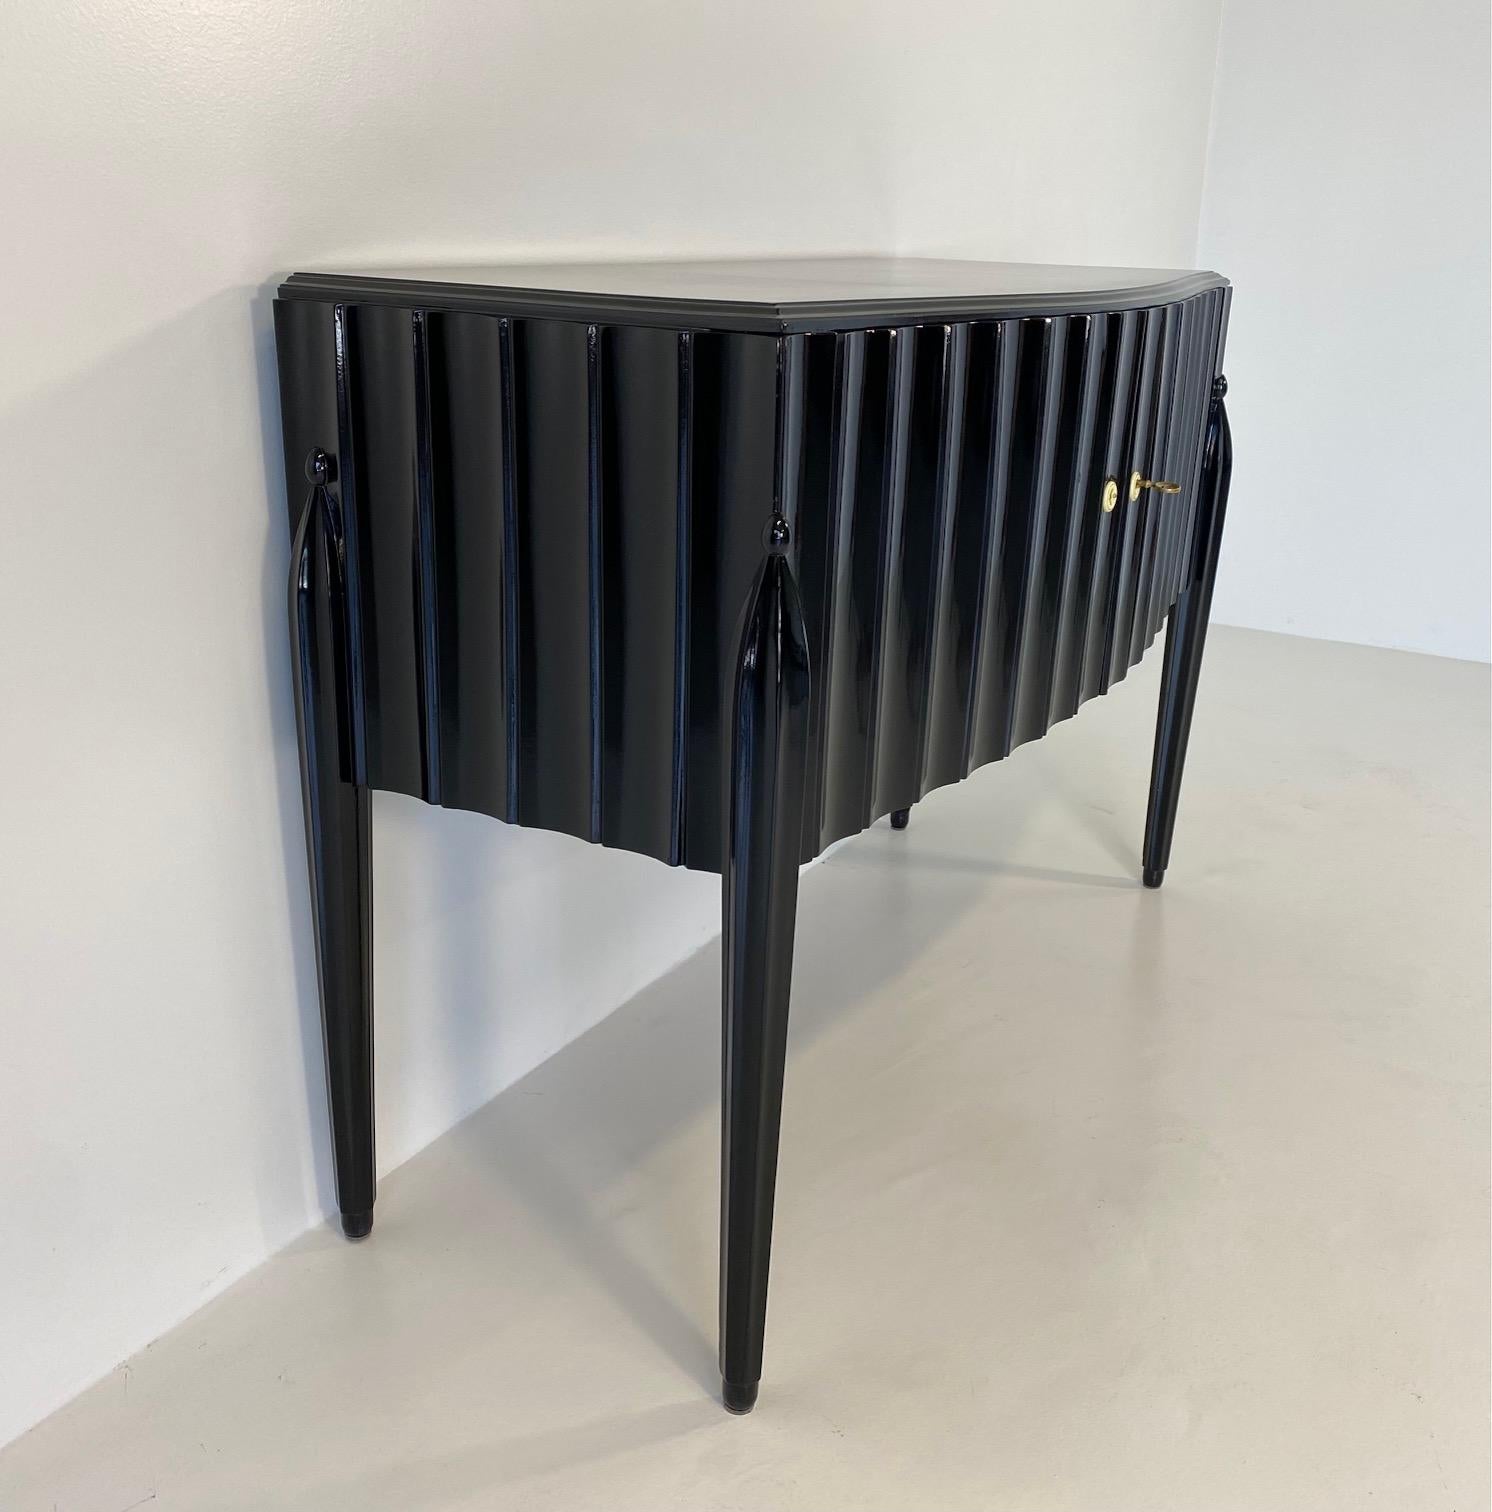 Mid-20th Century Italian Art Deco Black Lacquer Sideboard, 1940s, Attr. to Ulrich